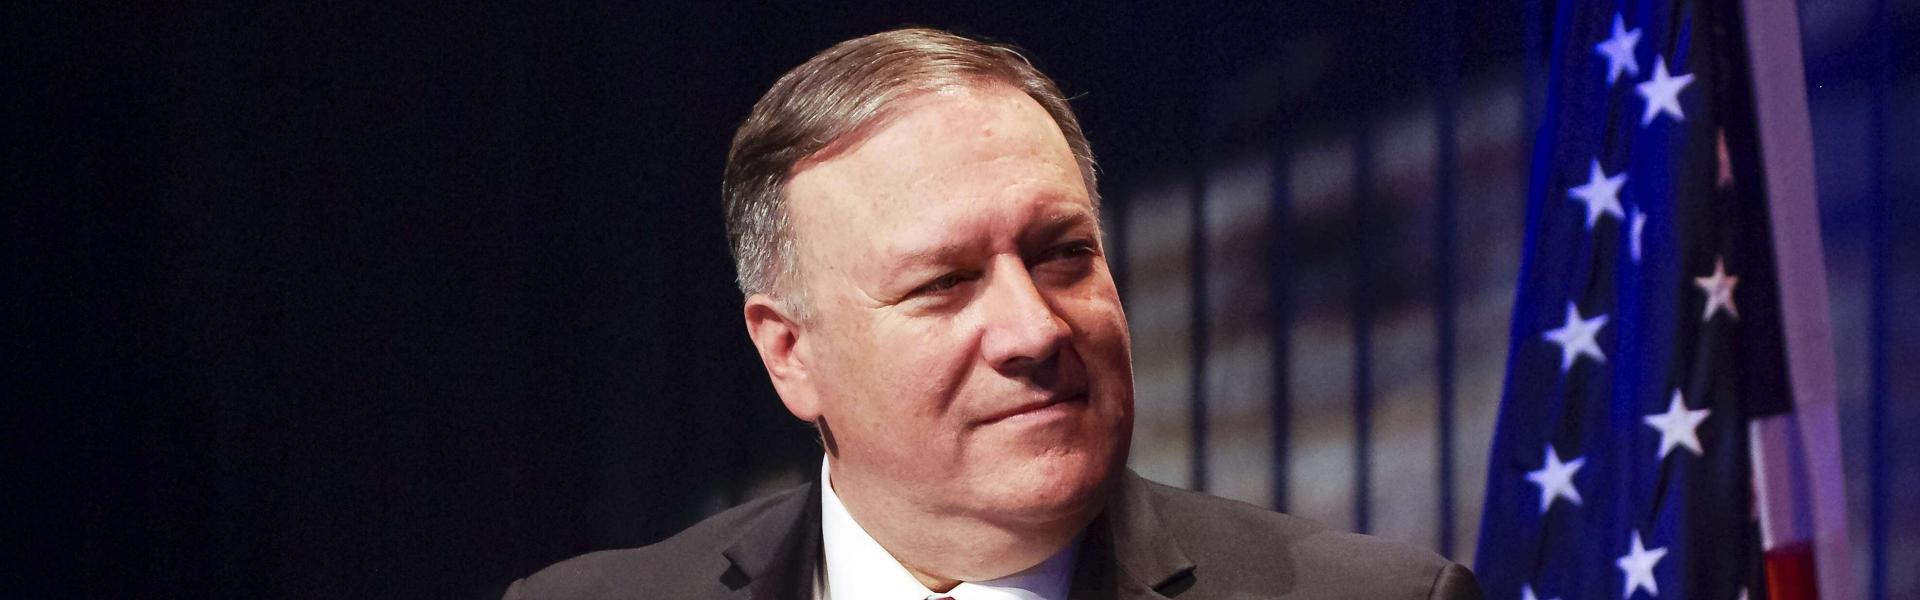 There will be a price for a Turkish attack on Kurds, says Pompeo 4